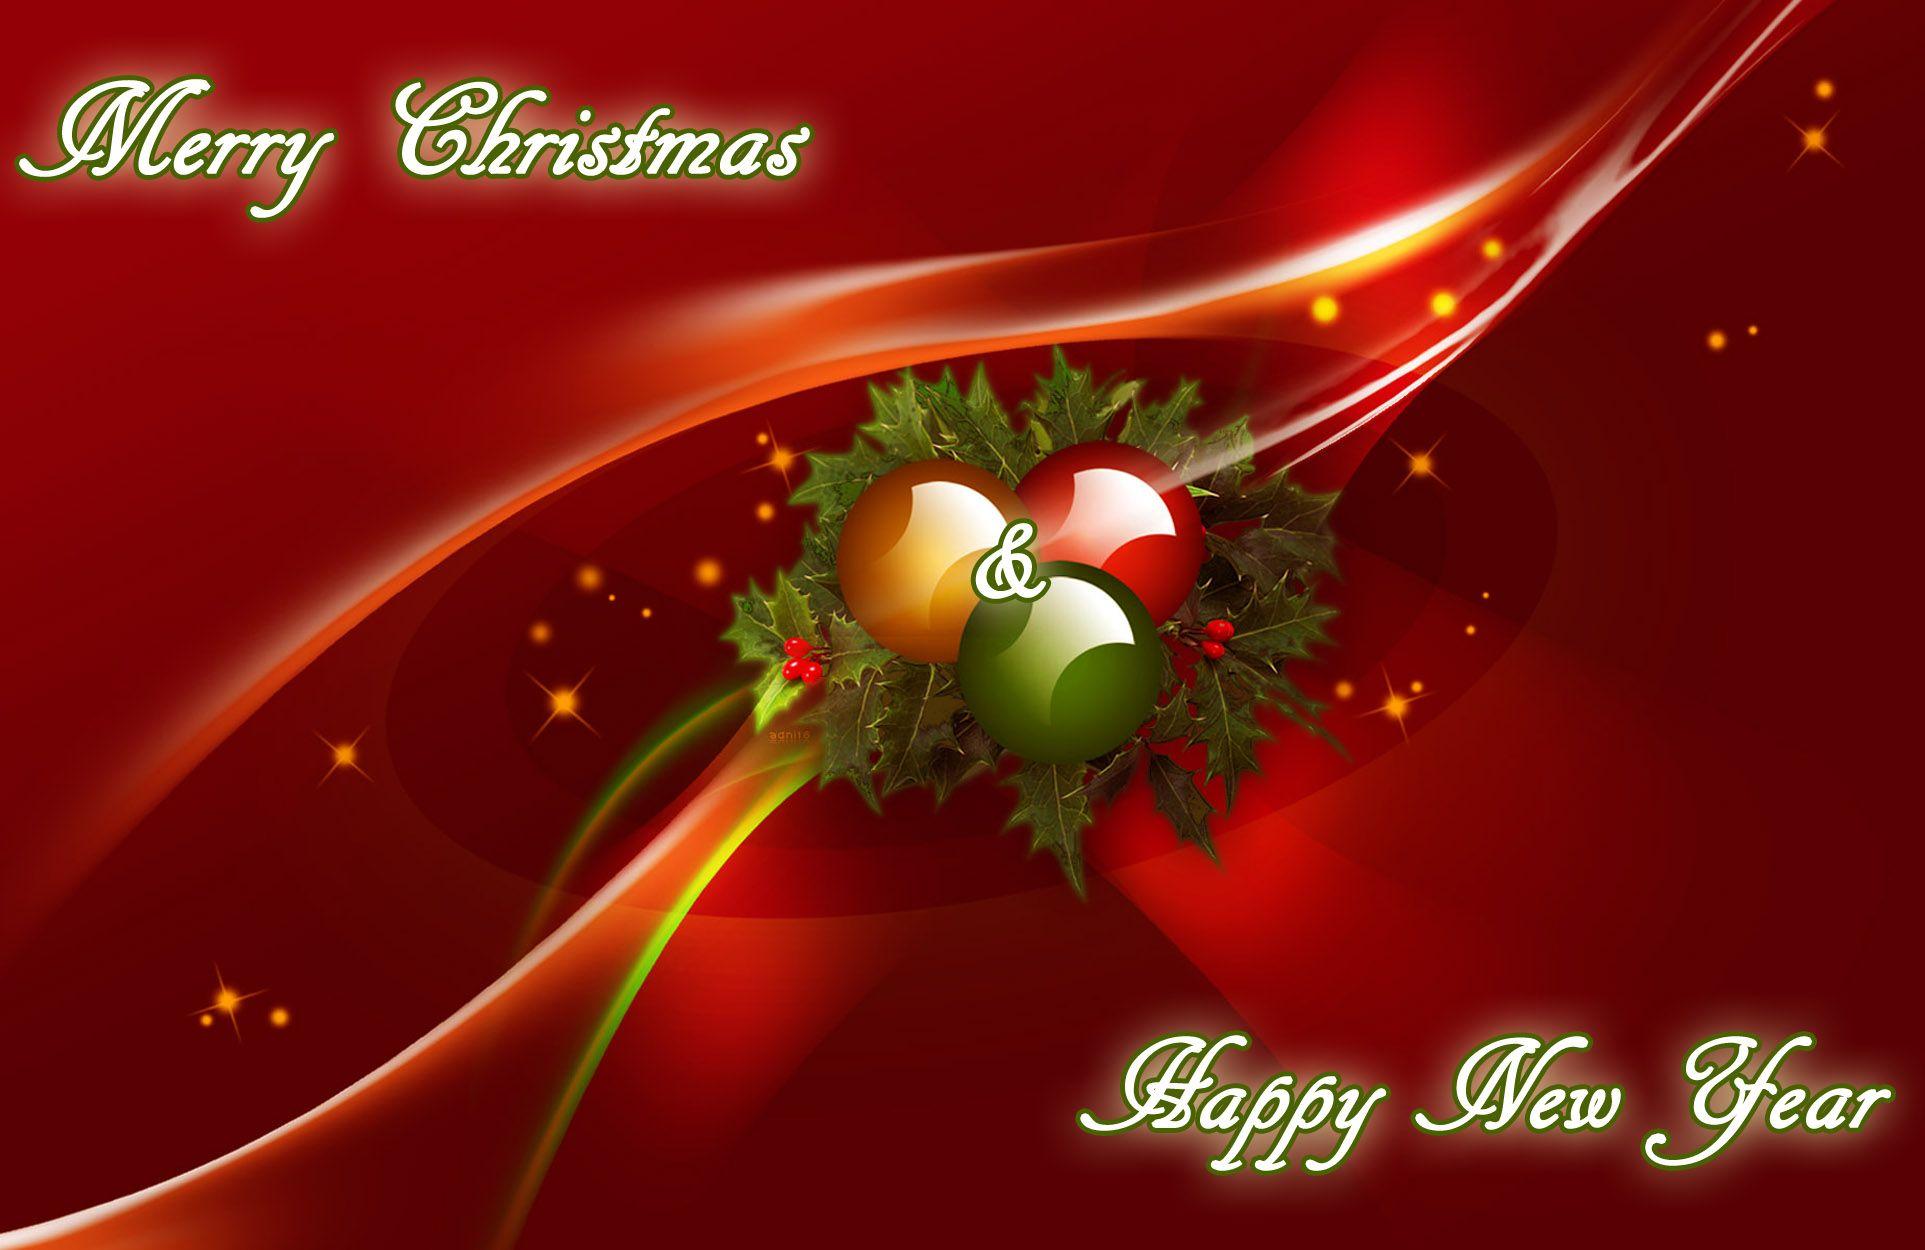 New Year Christmas 2013 Greeting Cards E Cards Wallpaper